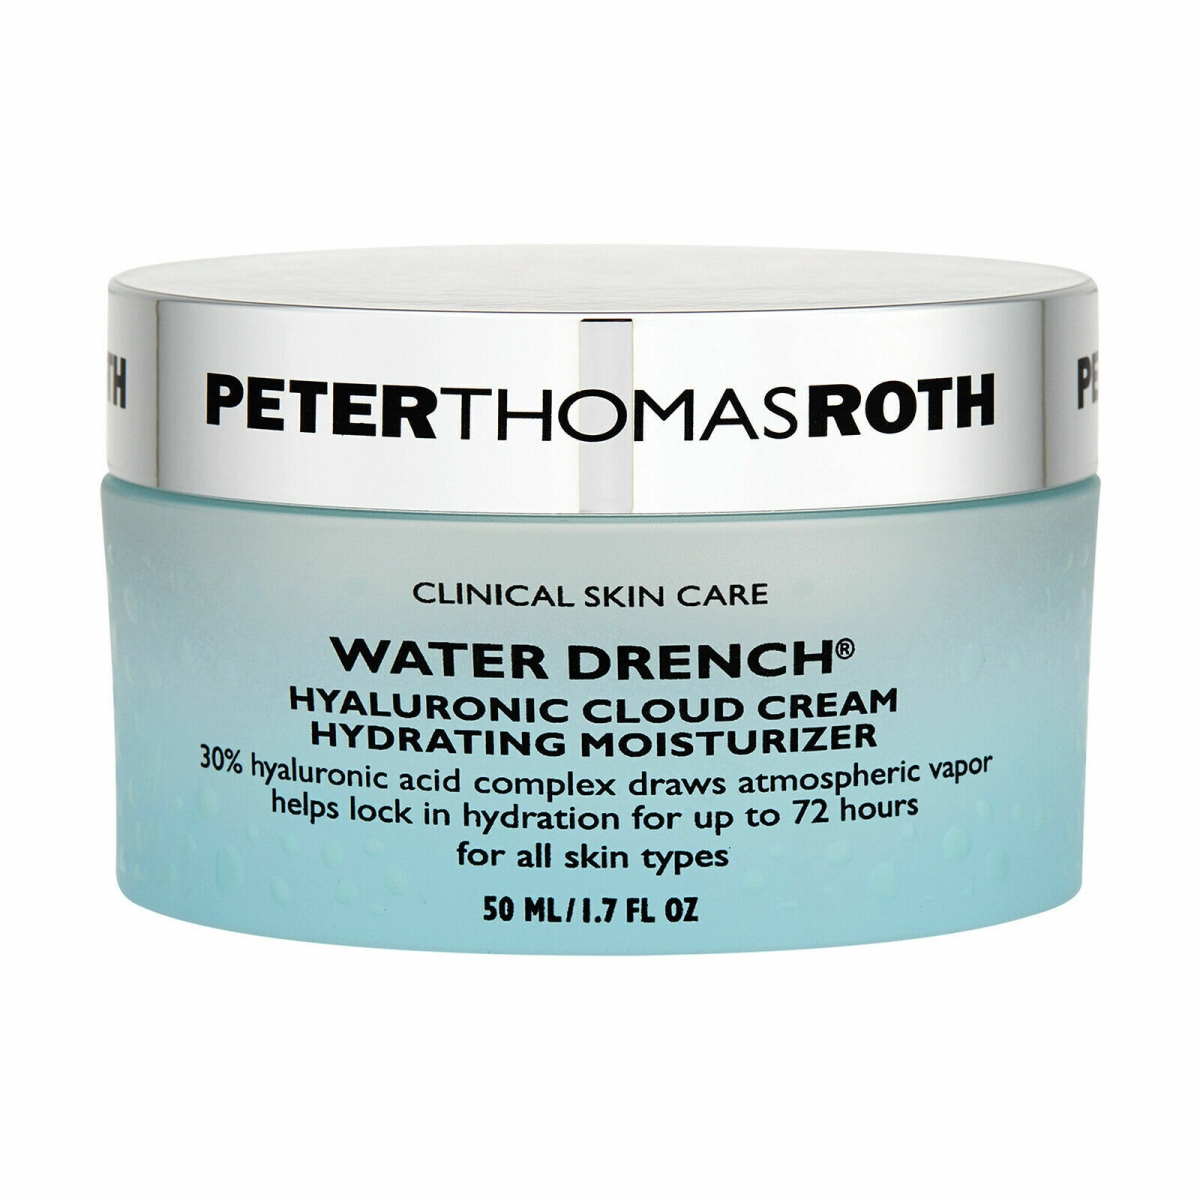 CNBH32 Peter Thomas Roth Water Drench Hyaluronic Cloud Cream 1.7 oz -  Keto store